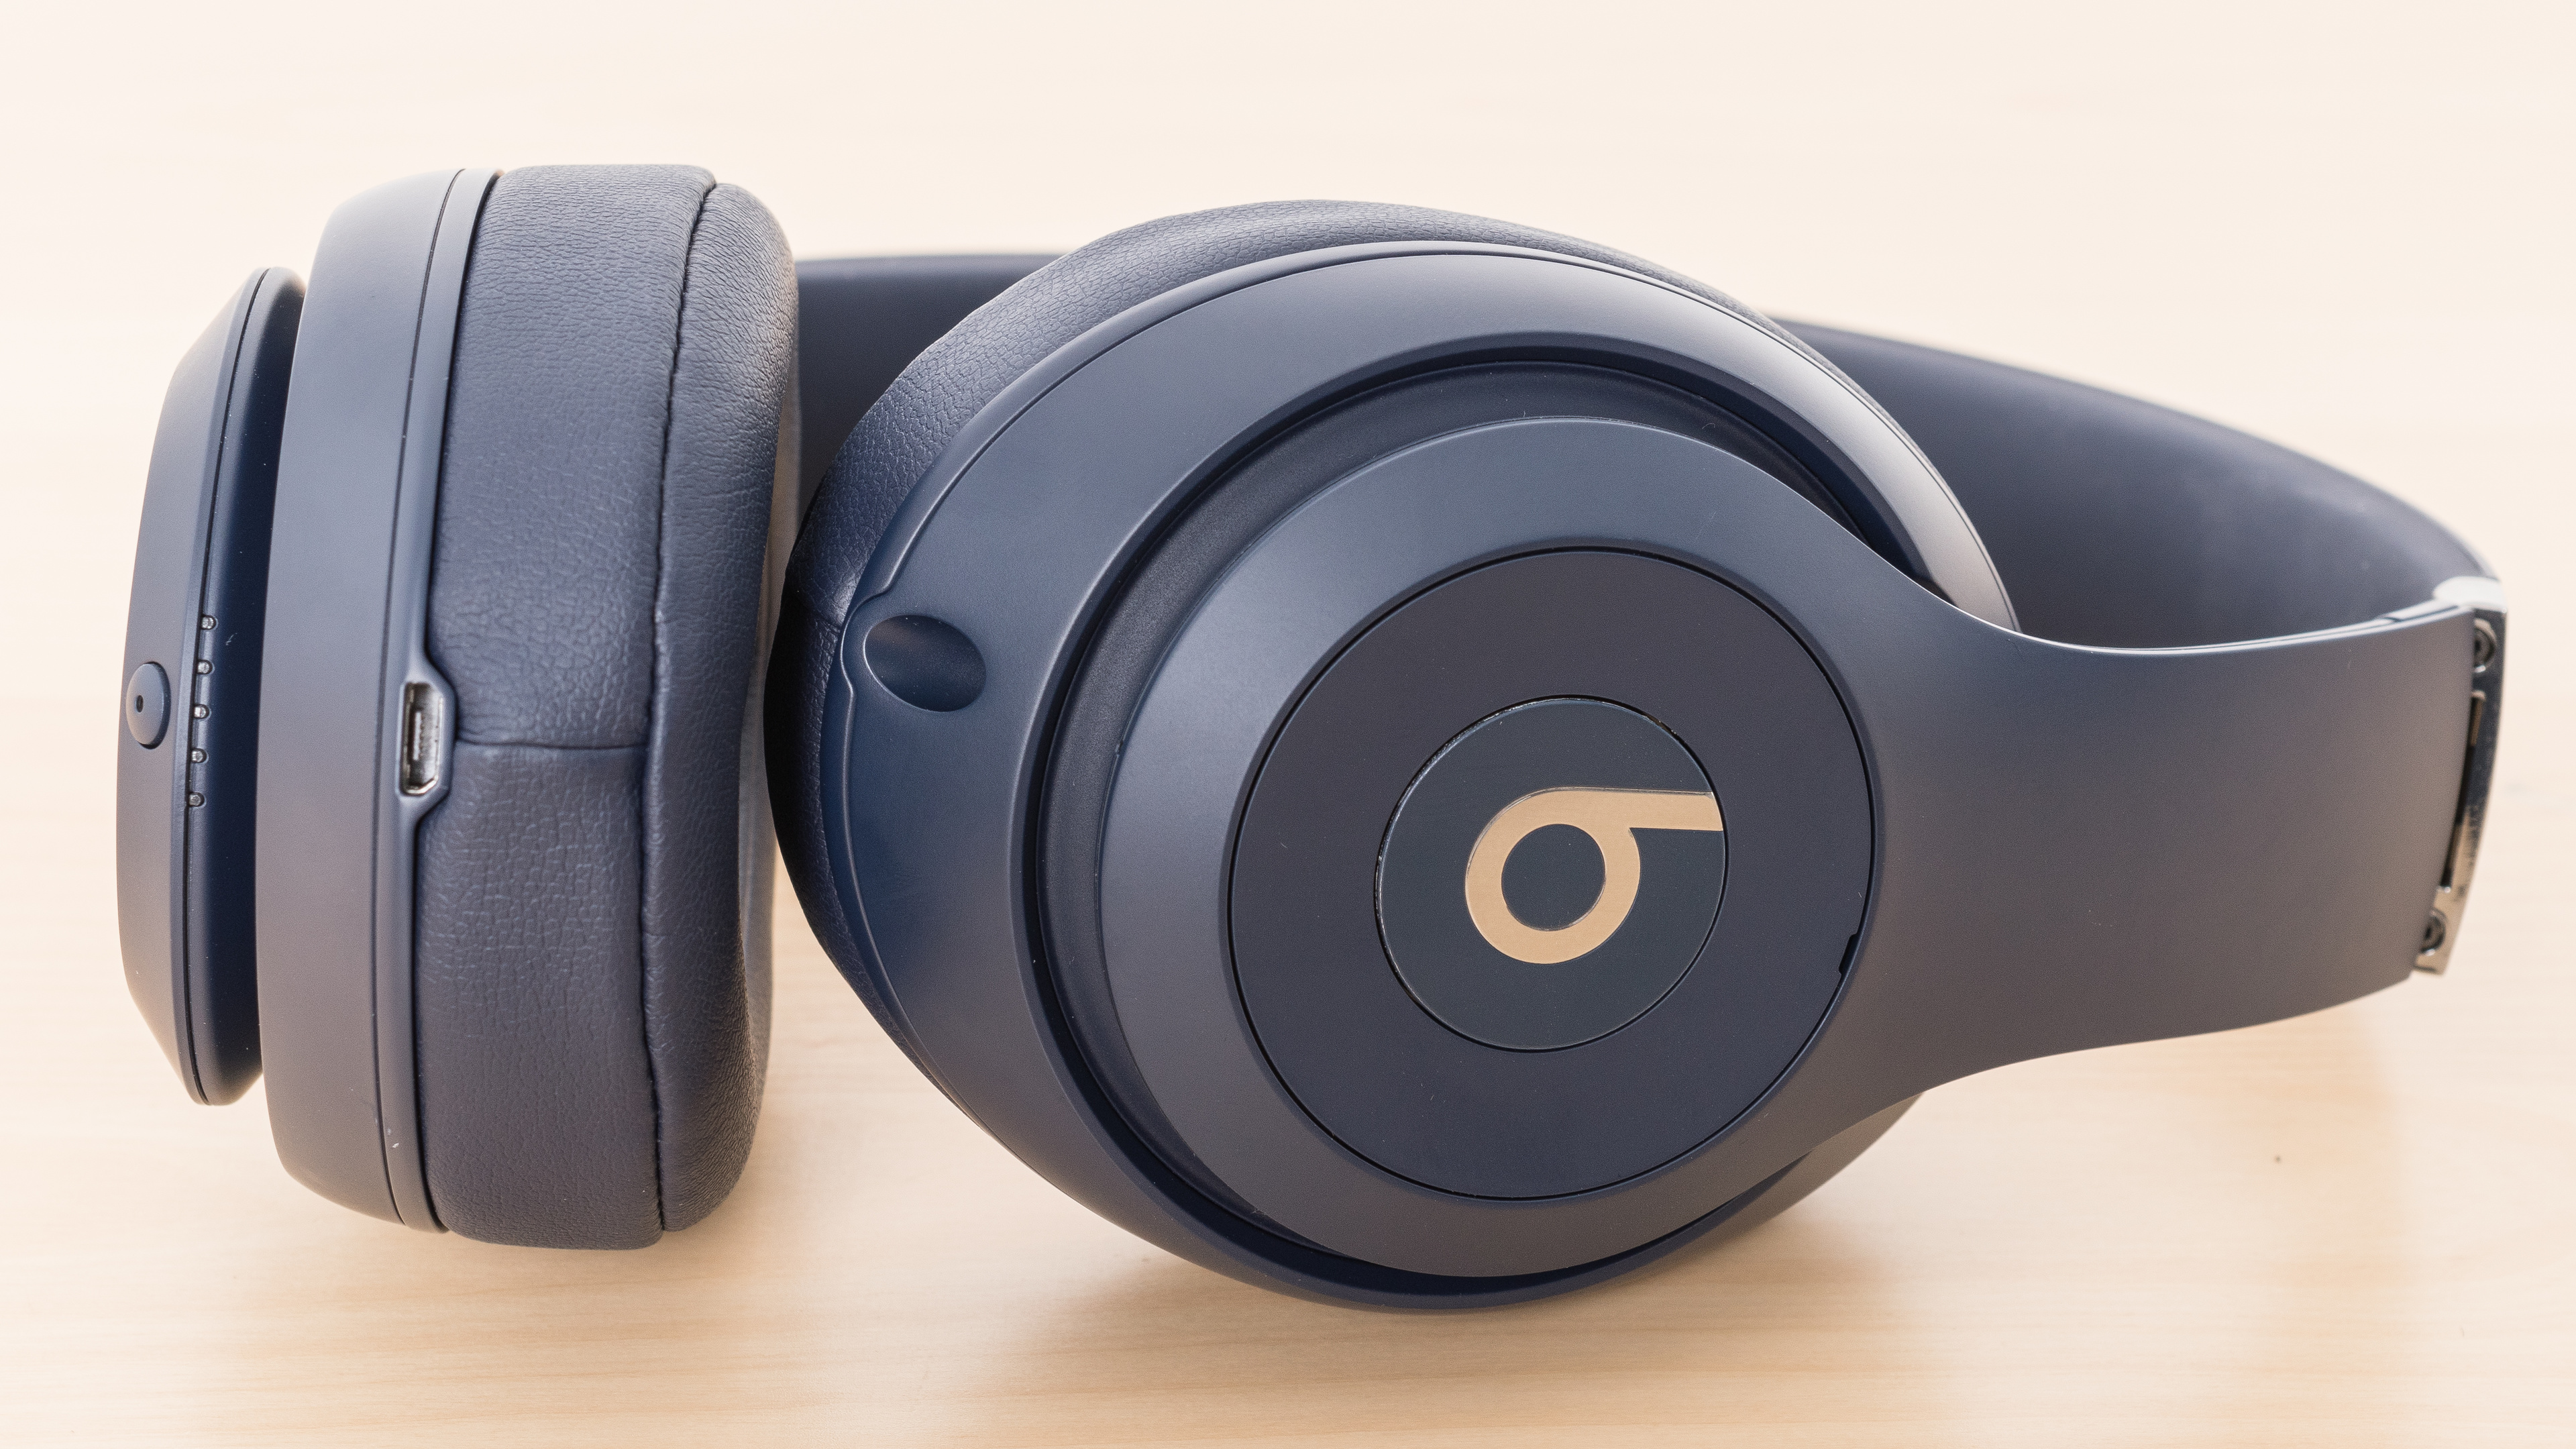 Beats Studio3 Vs Bose QC35 - Price And Performance Face-Off